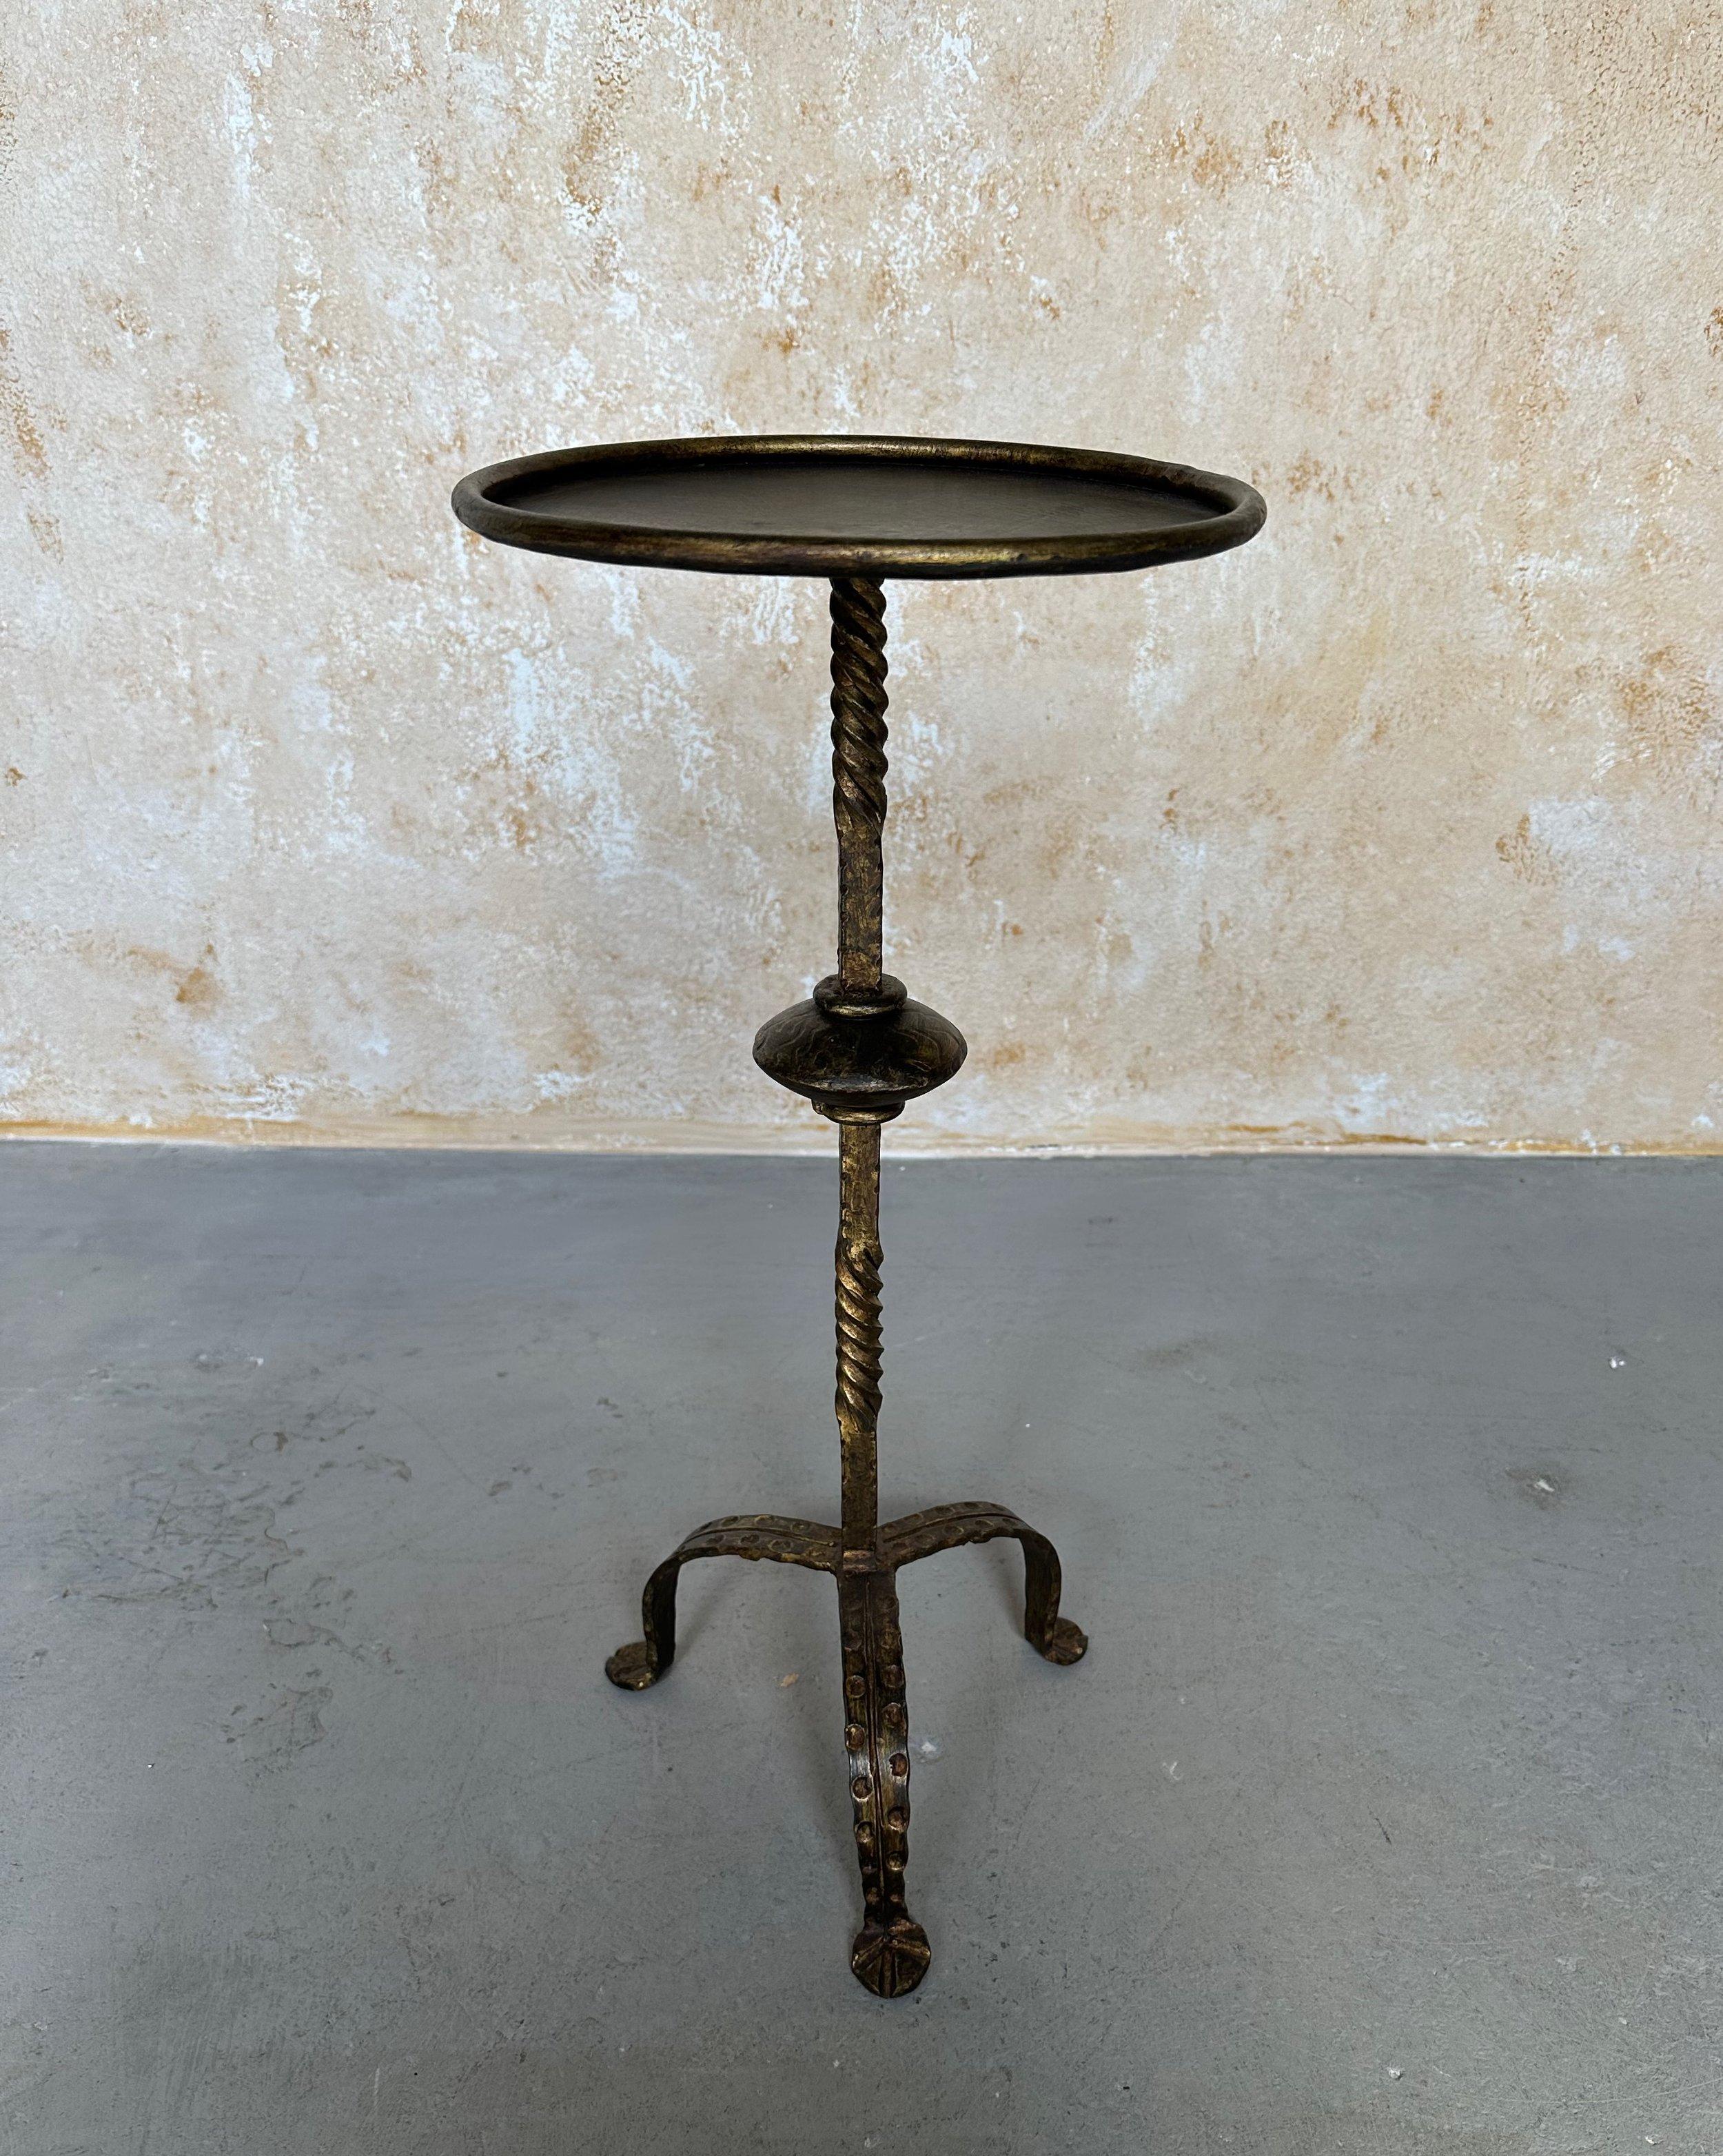 This unique and highly decorative small end table was recently hand crafted by skilled European artisans using traditional iron-working methods. It features a twisted stem with a central decorative element mounted on an elevated hammered tripod